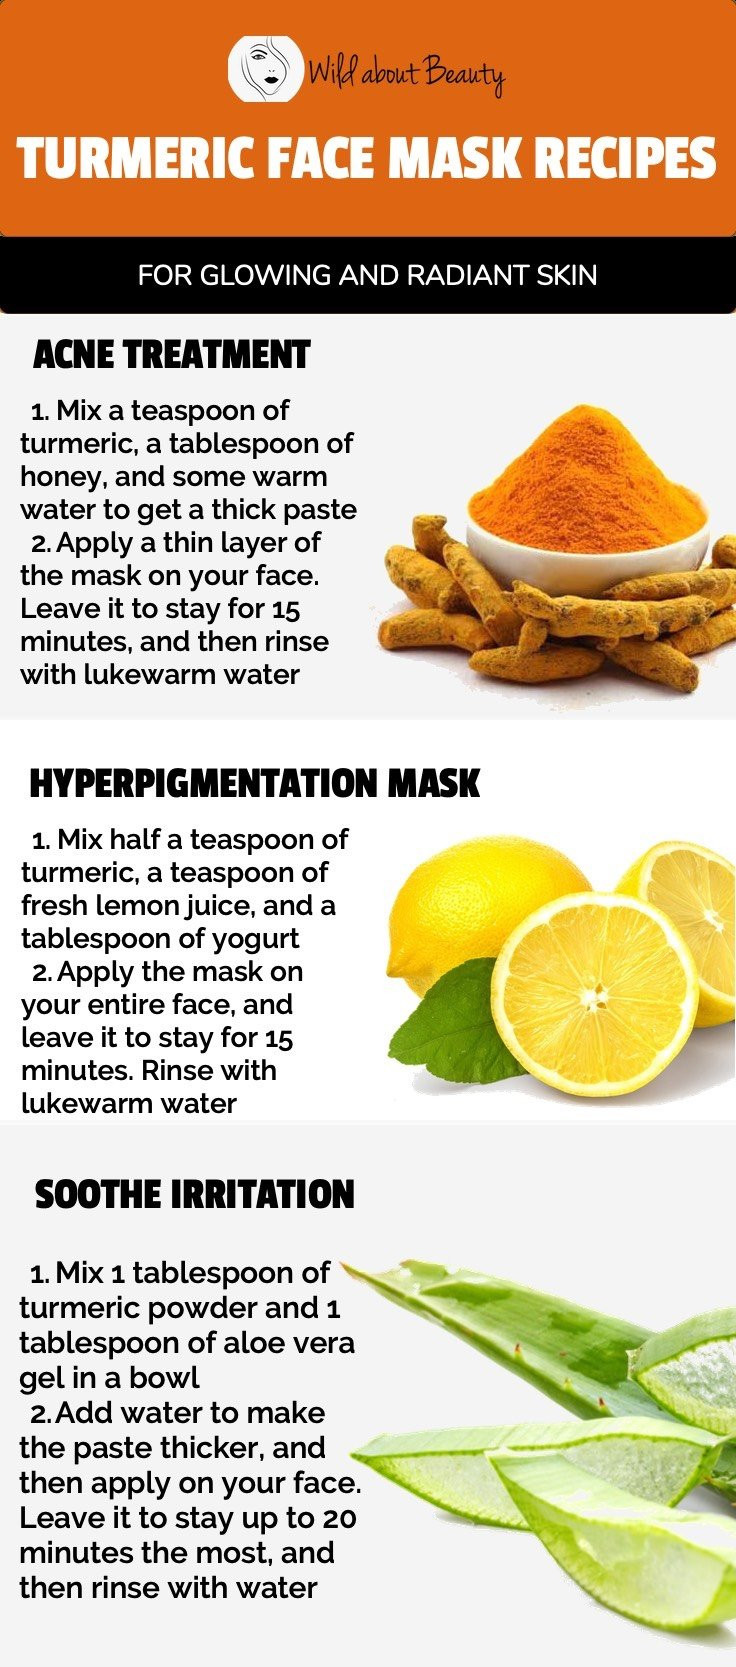 DIY Turmeric Face Mask
 Try These Turmeric Face Mask Recipes For Glowing and